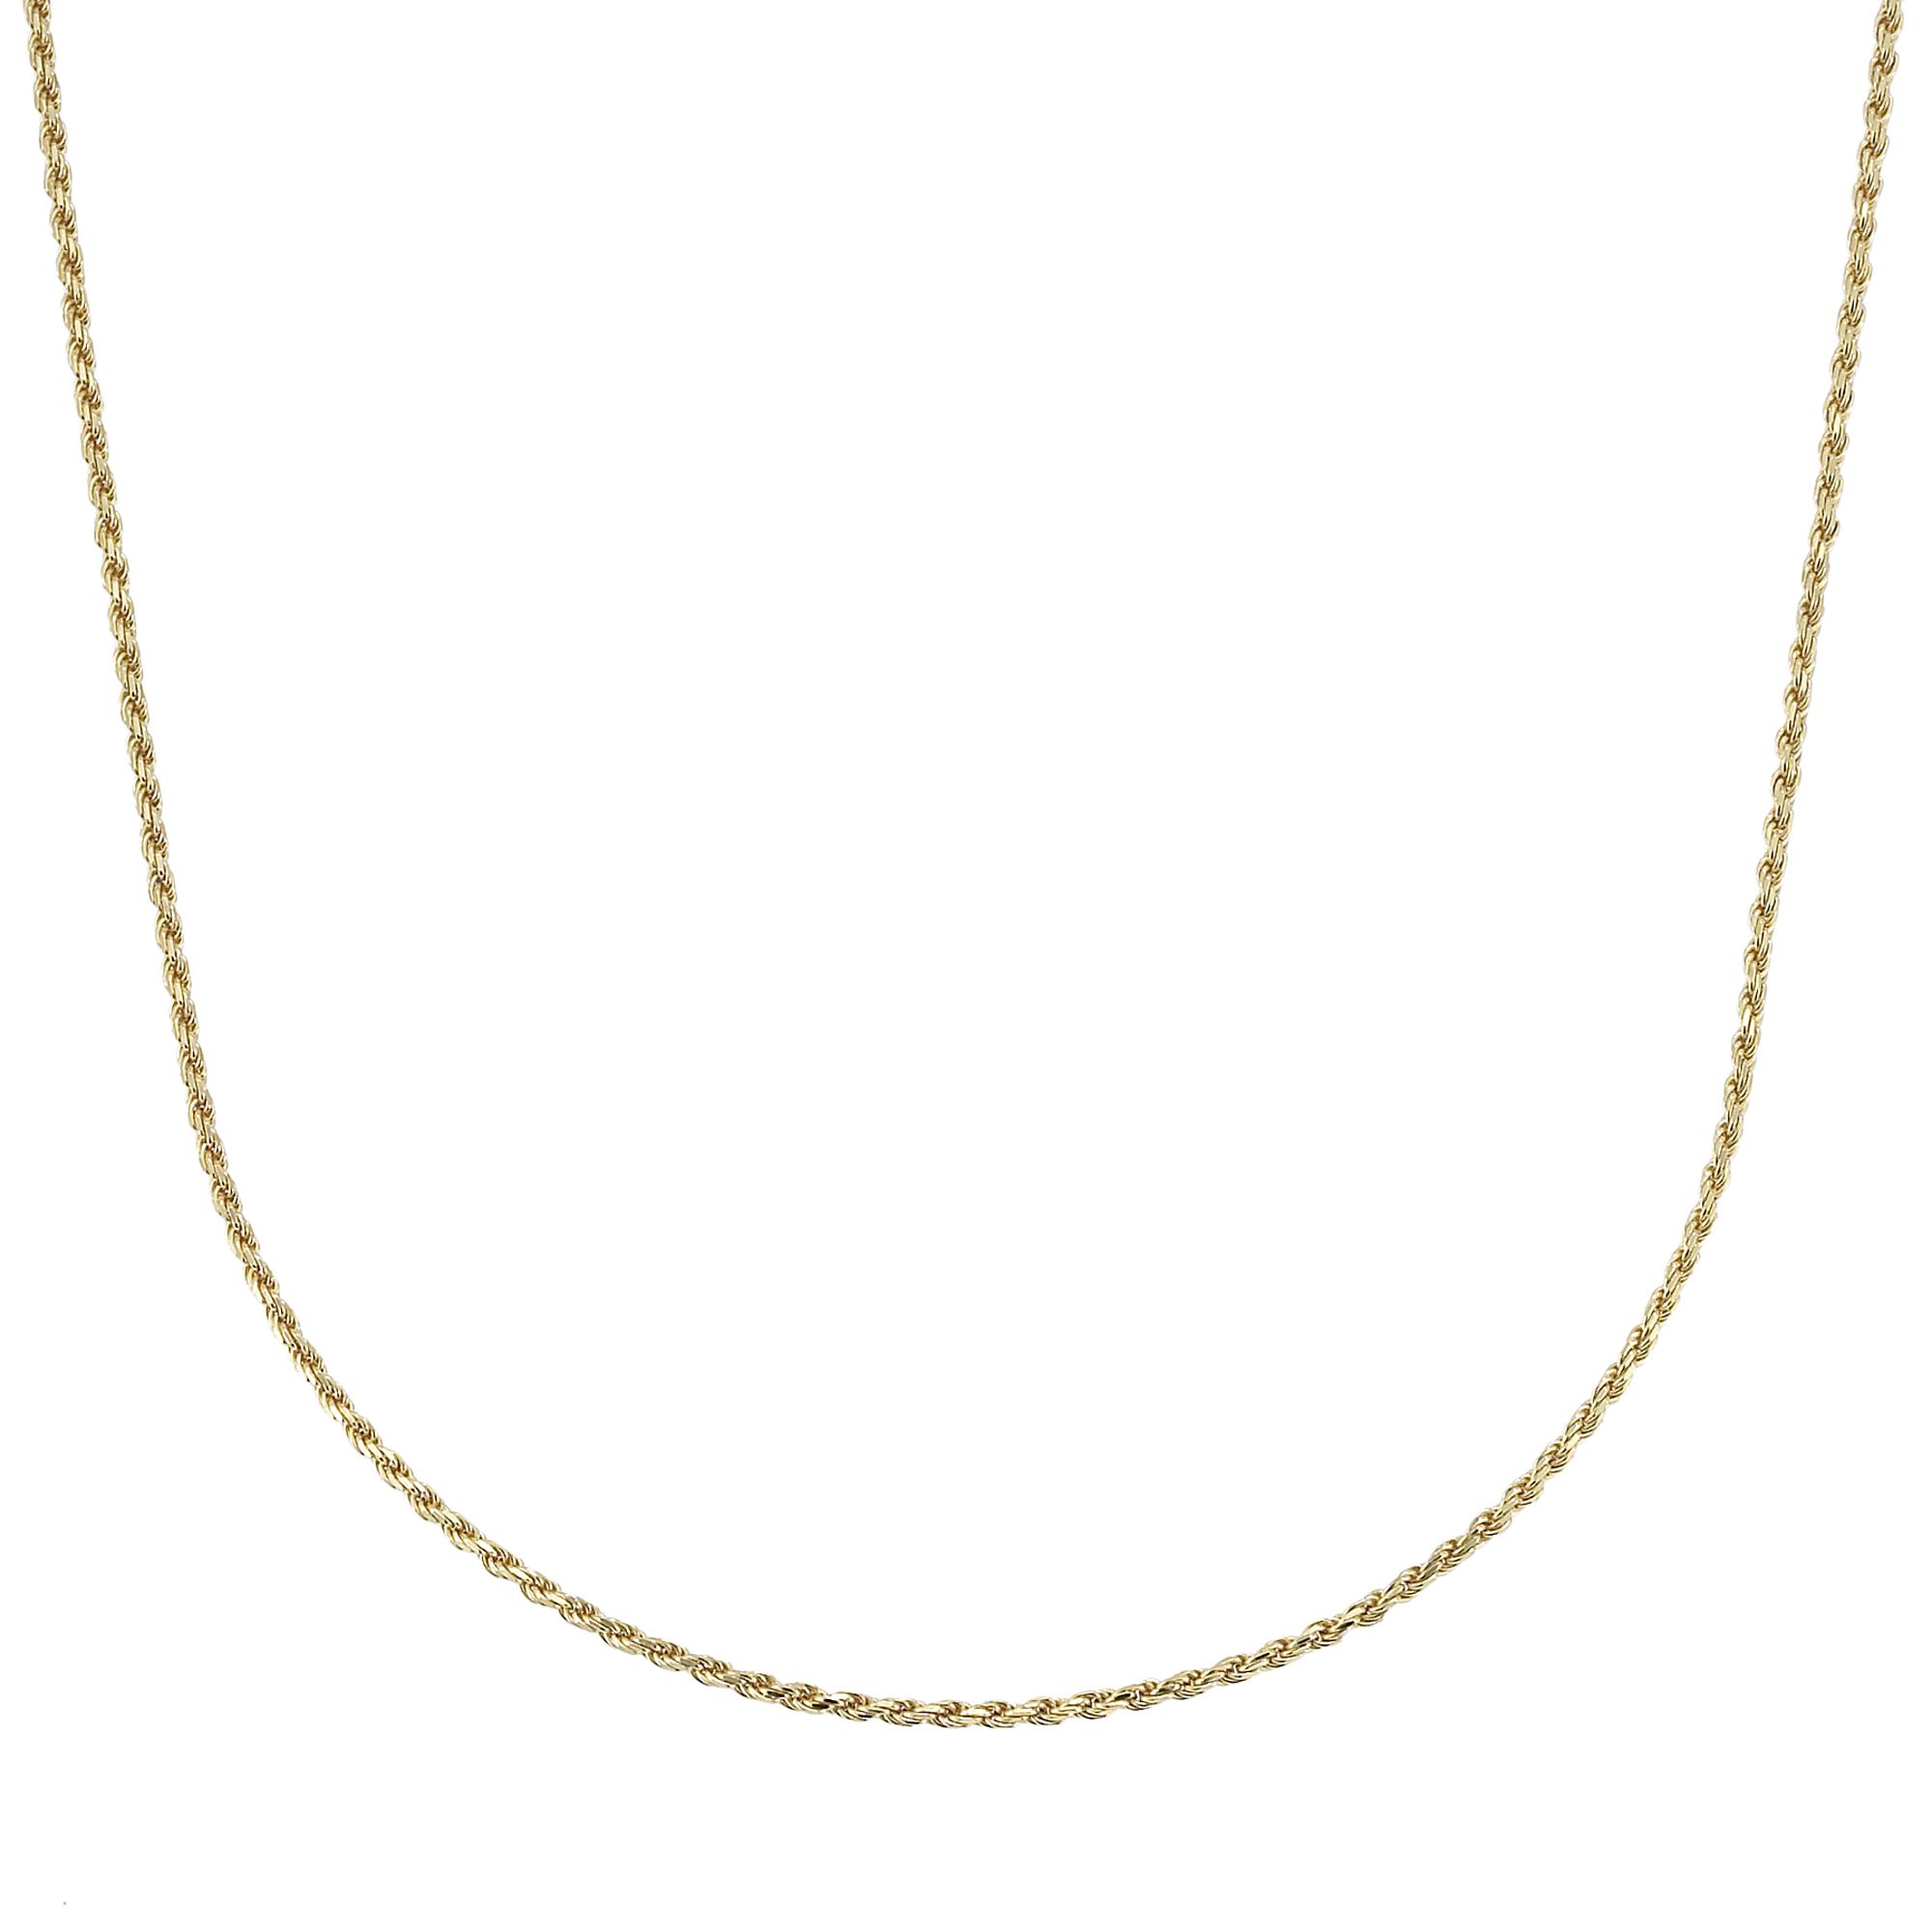 24k Gold over Sterling Silver Diamond-cut Rope Necklace